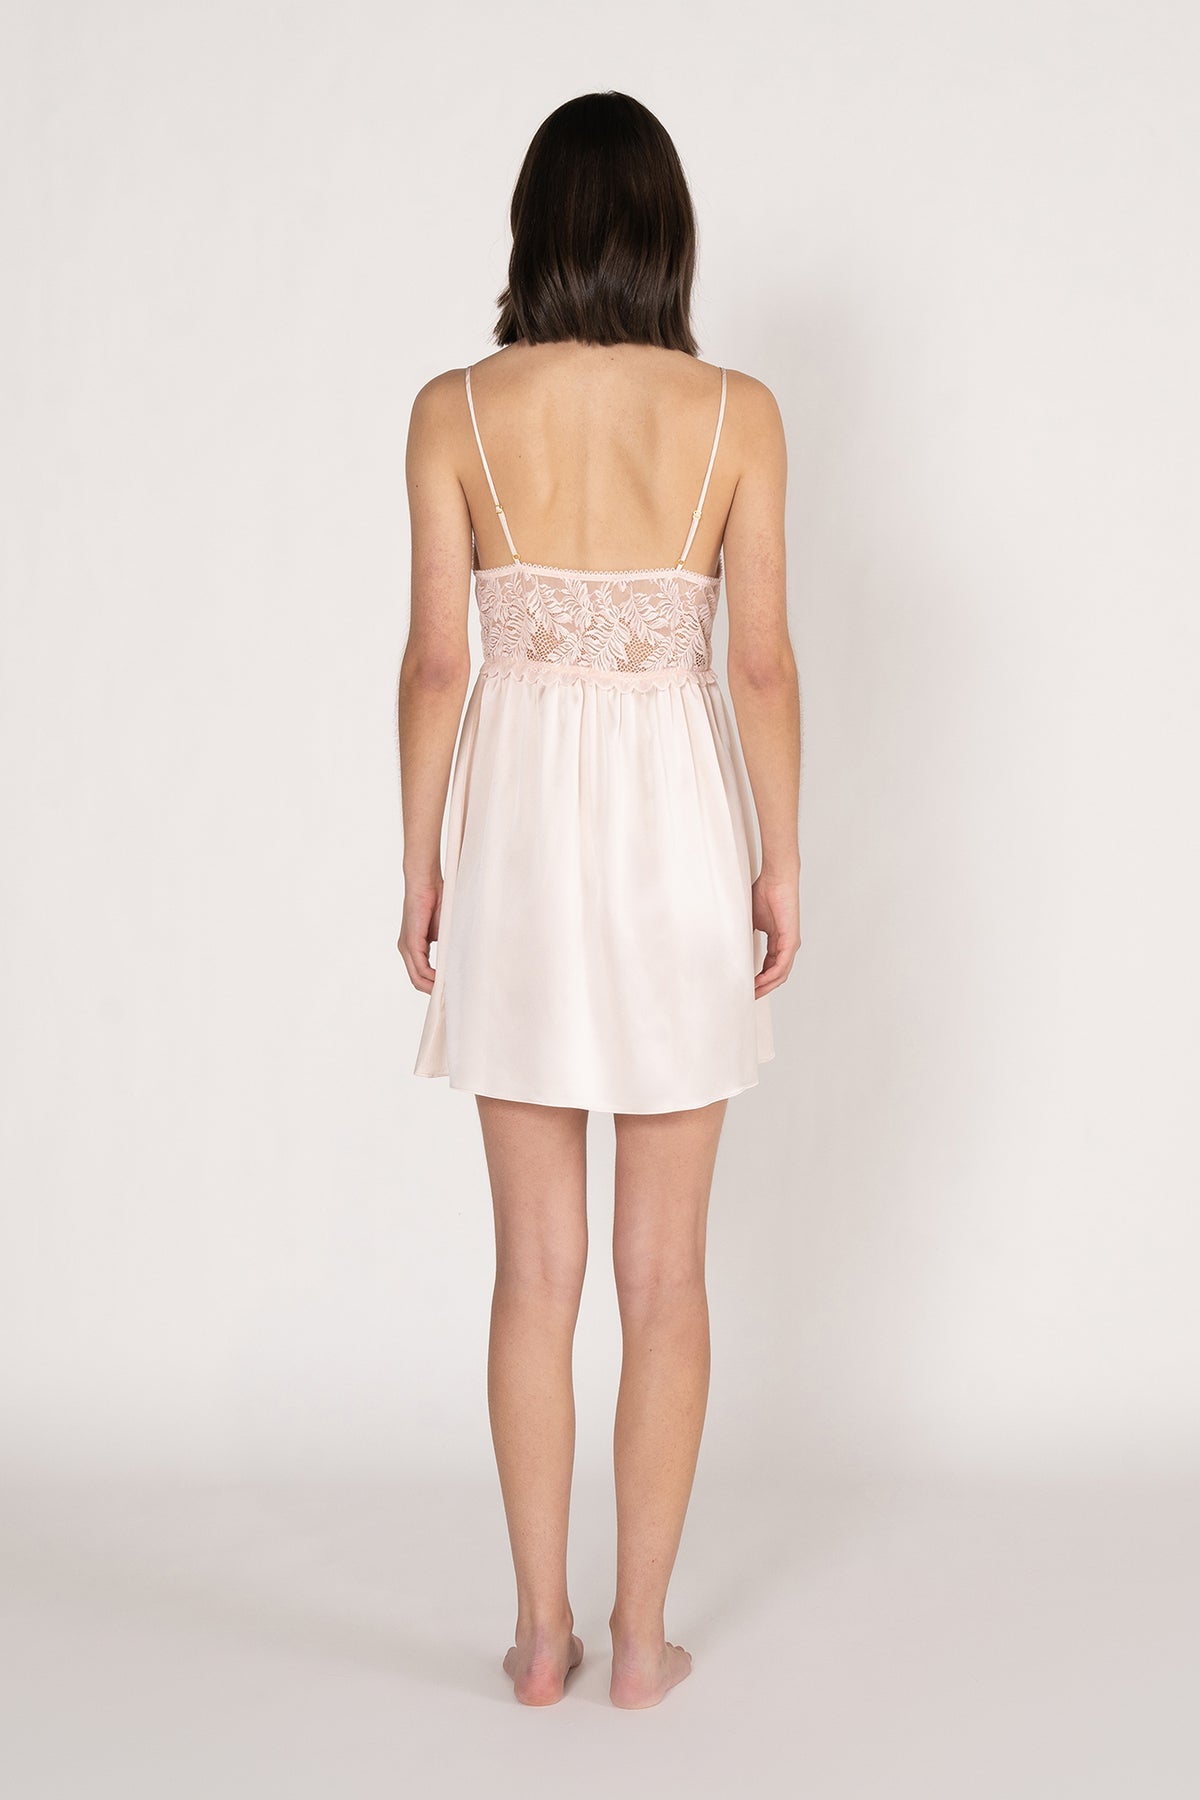 The Stretch Lace Chemise in Primrose Pink